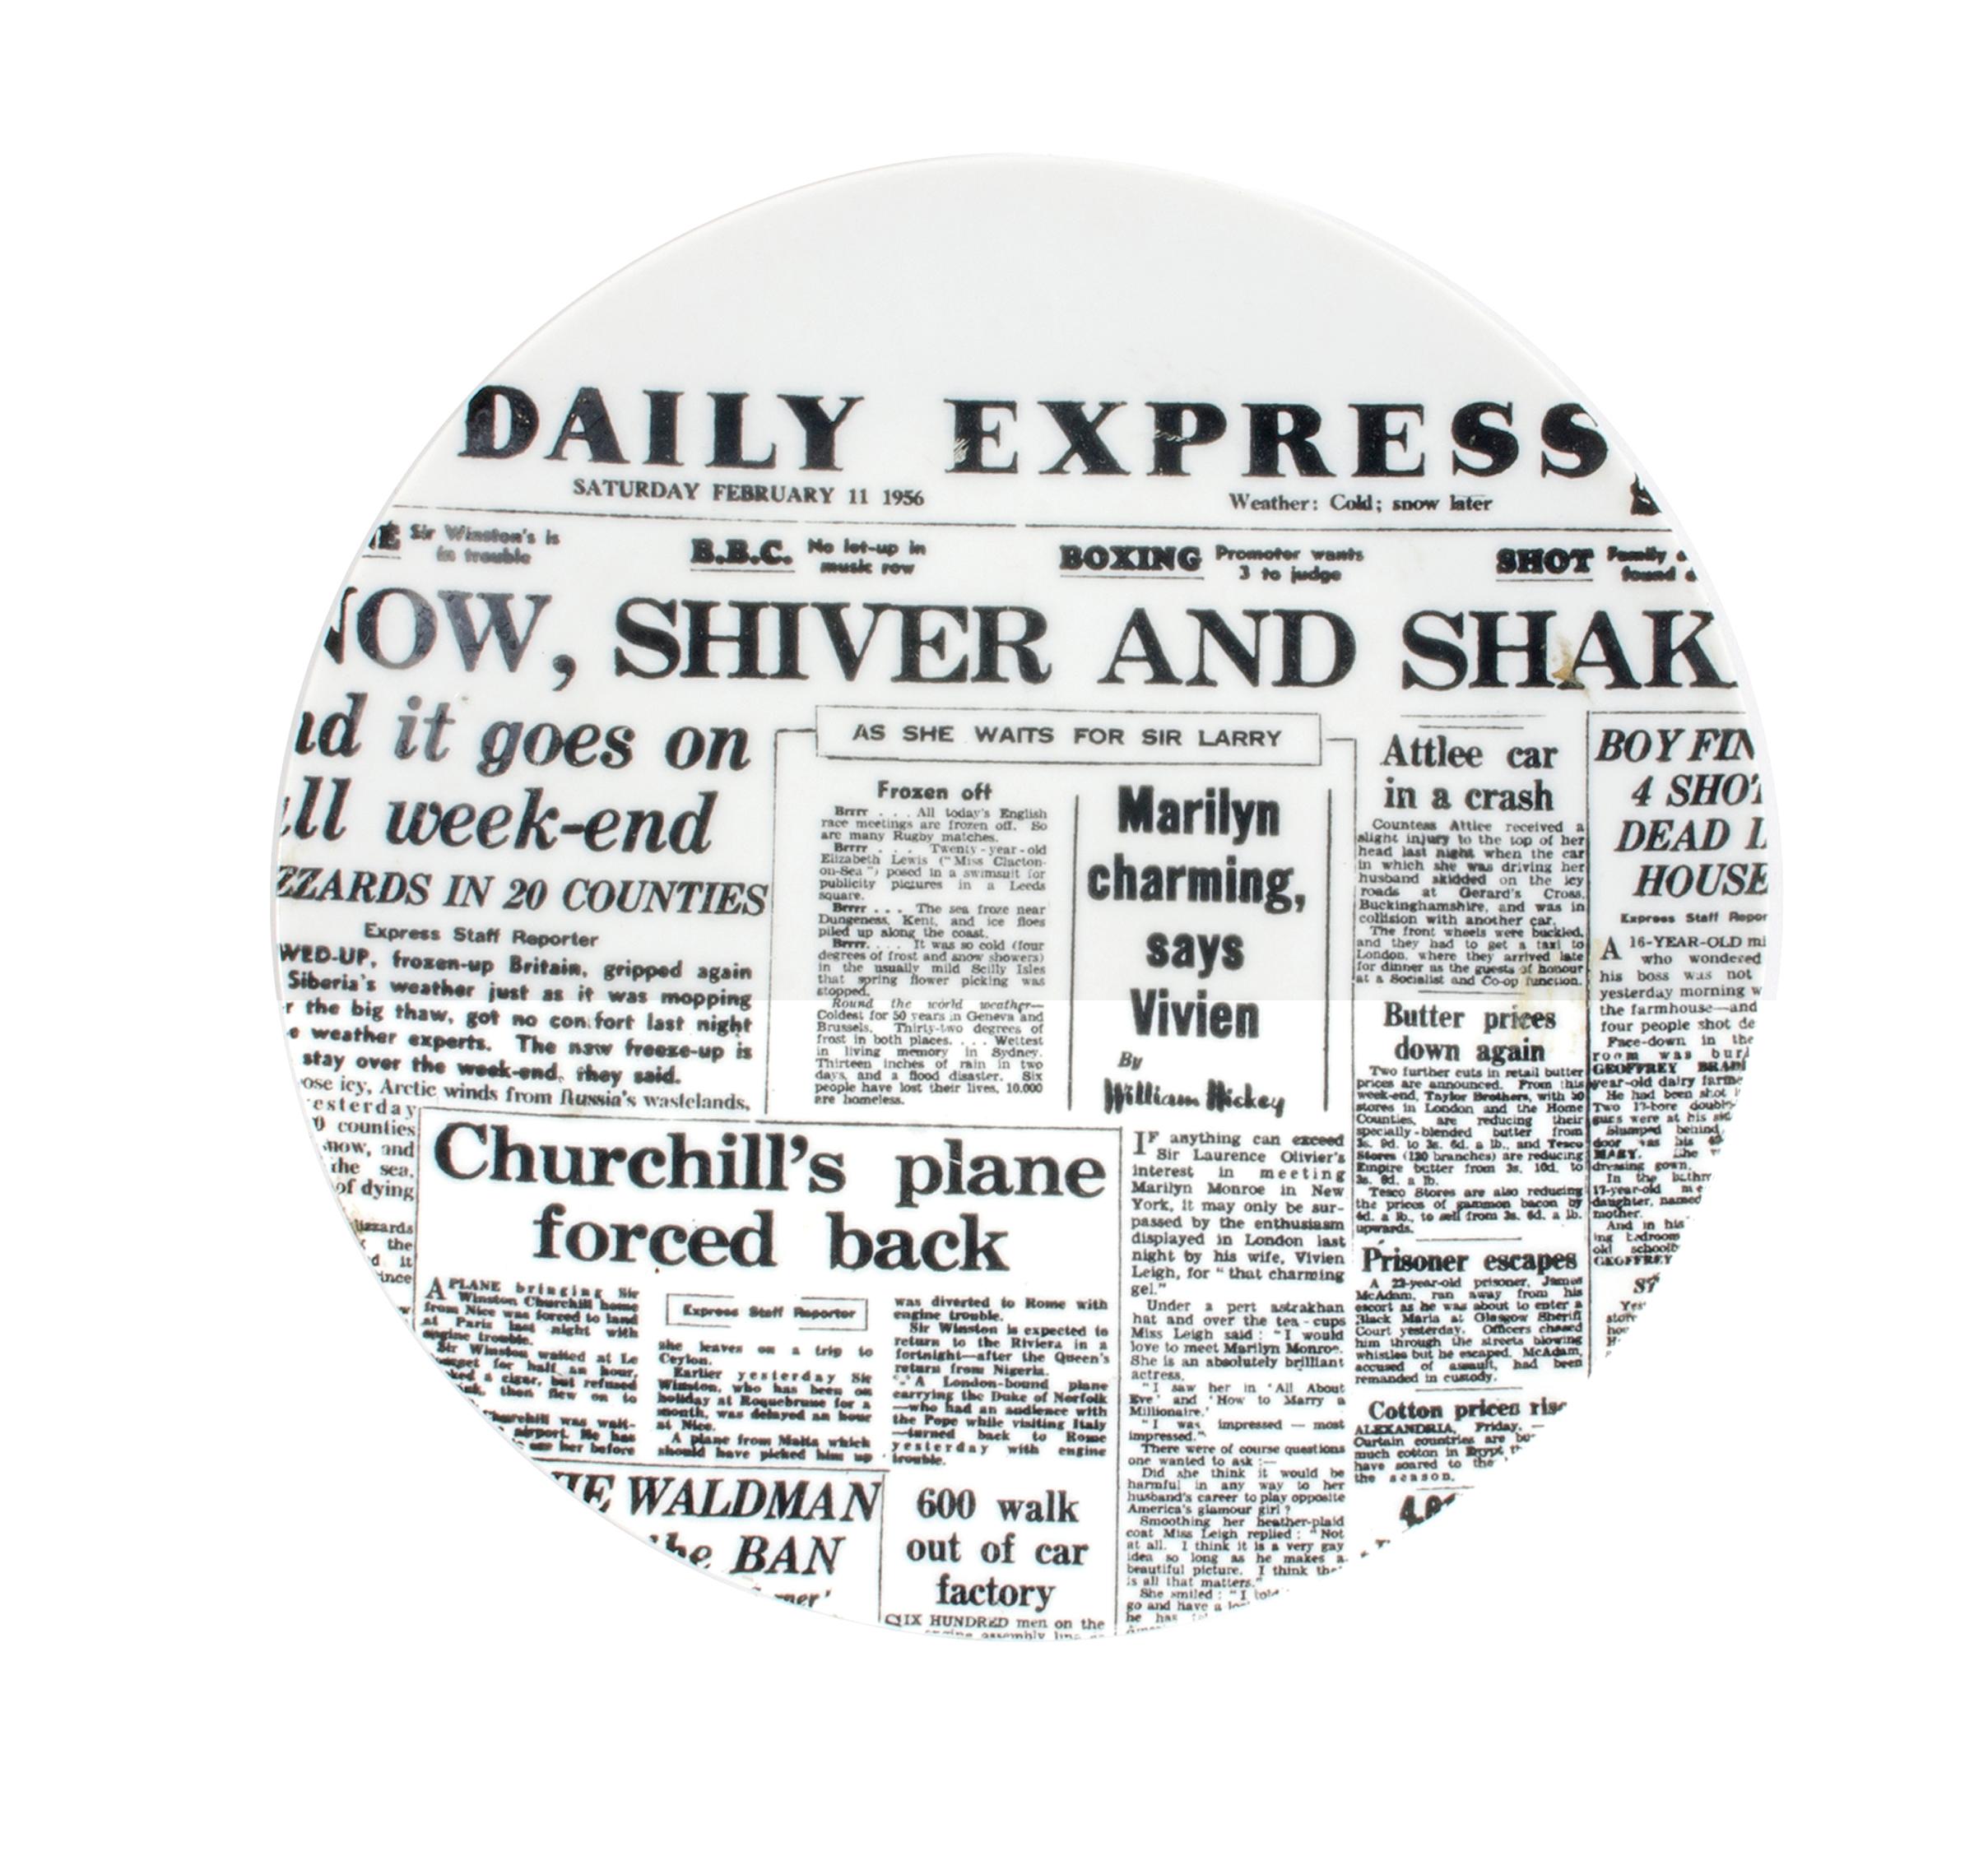 Piero Fornasetti porcelain newspaper plate,
Daily Express,
Giornali (Newspapers)
Late 1950s.
(NY8534B)

The Piero Fornasetti porcelain plate depicts the front page of the Daily Express from Saturday, February 11, 1956, with the main headline